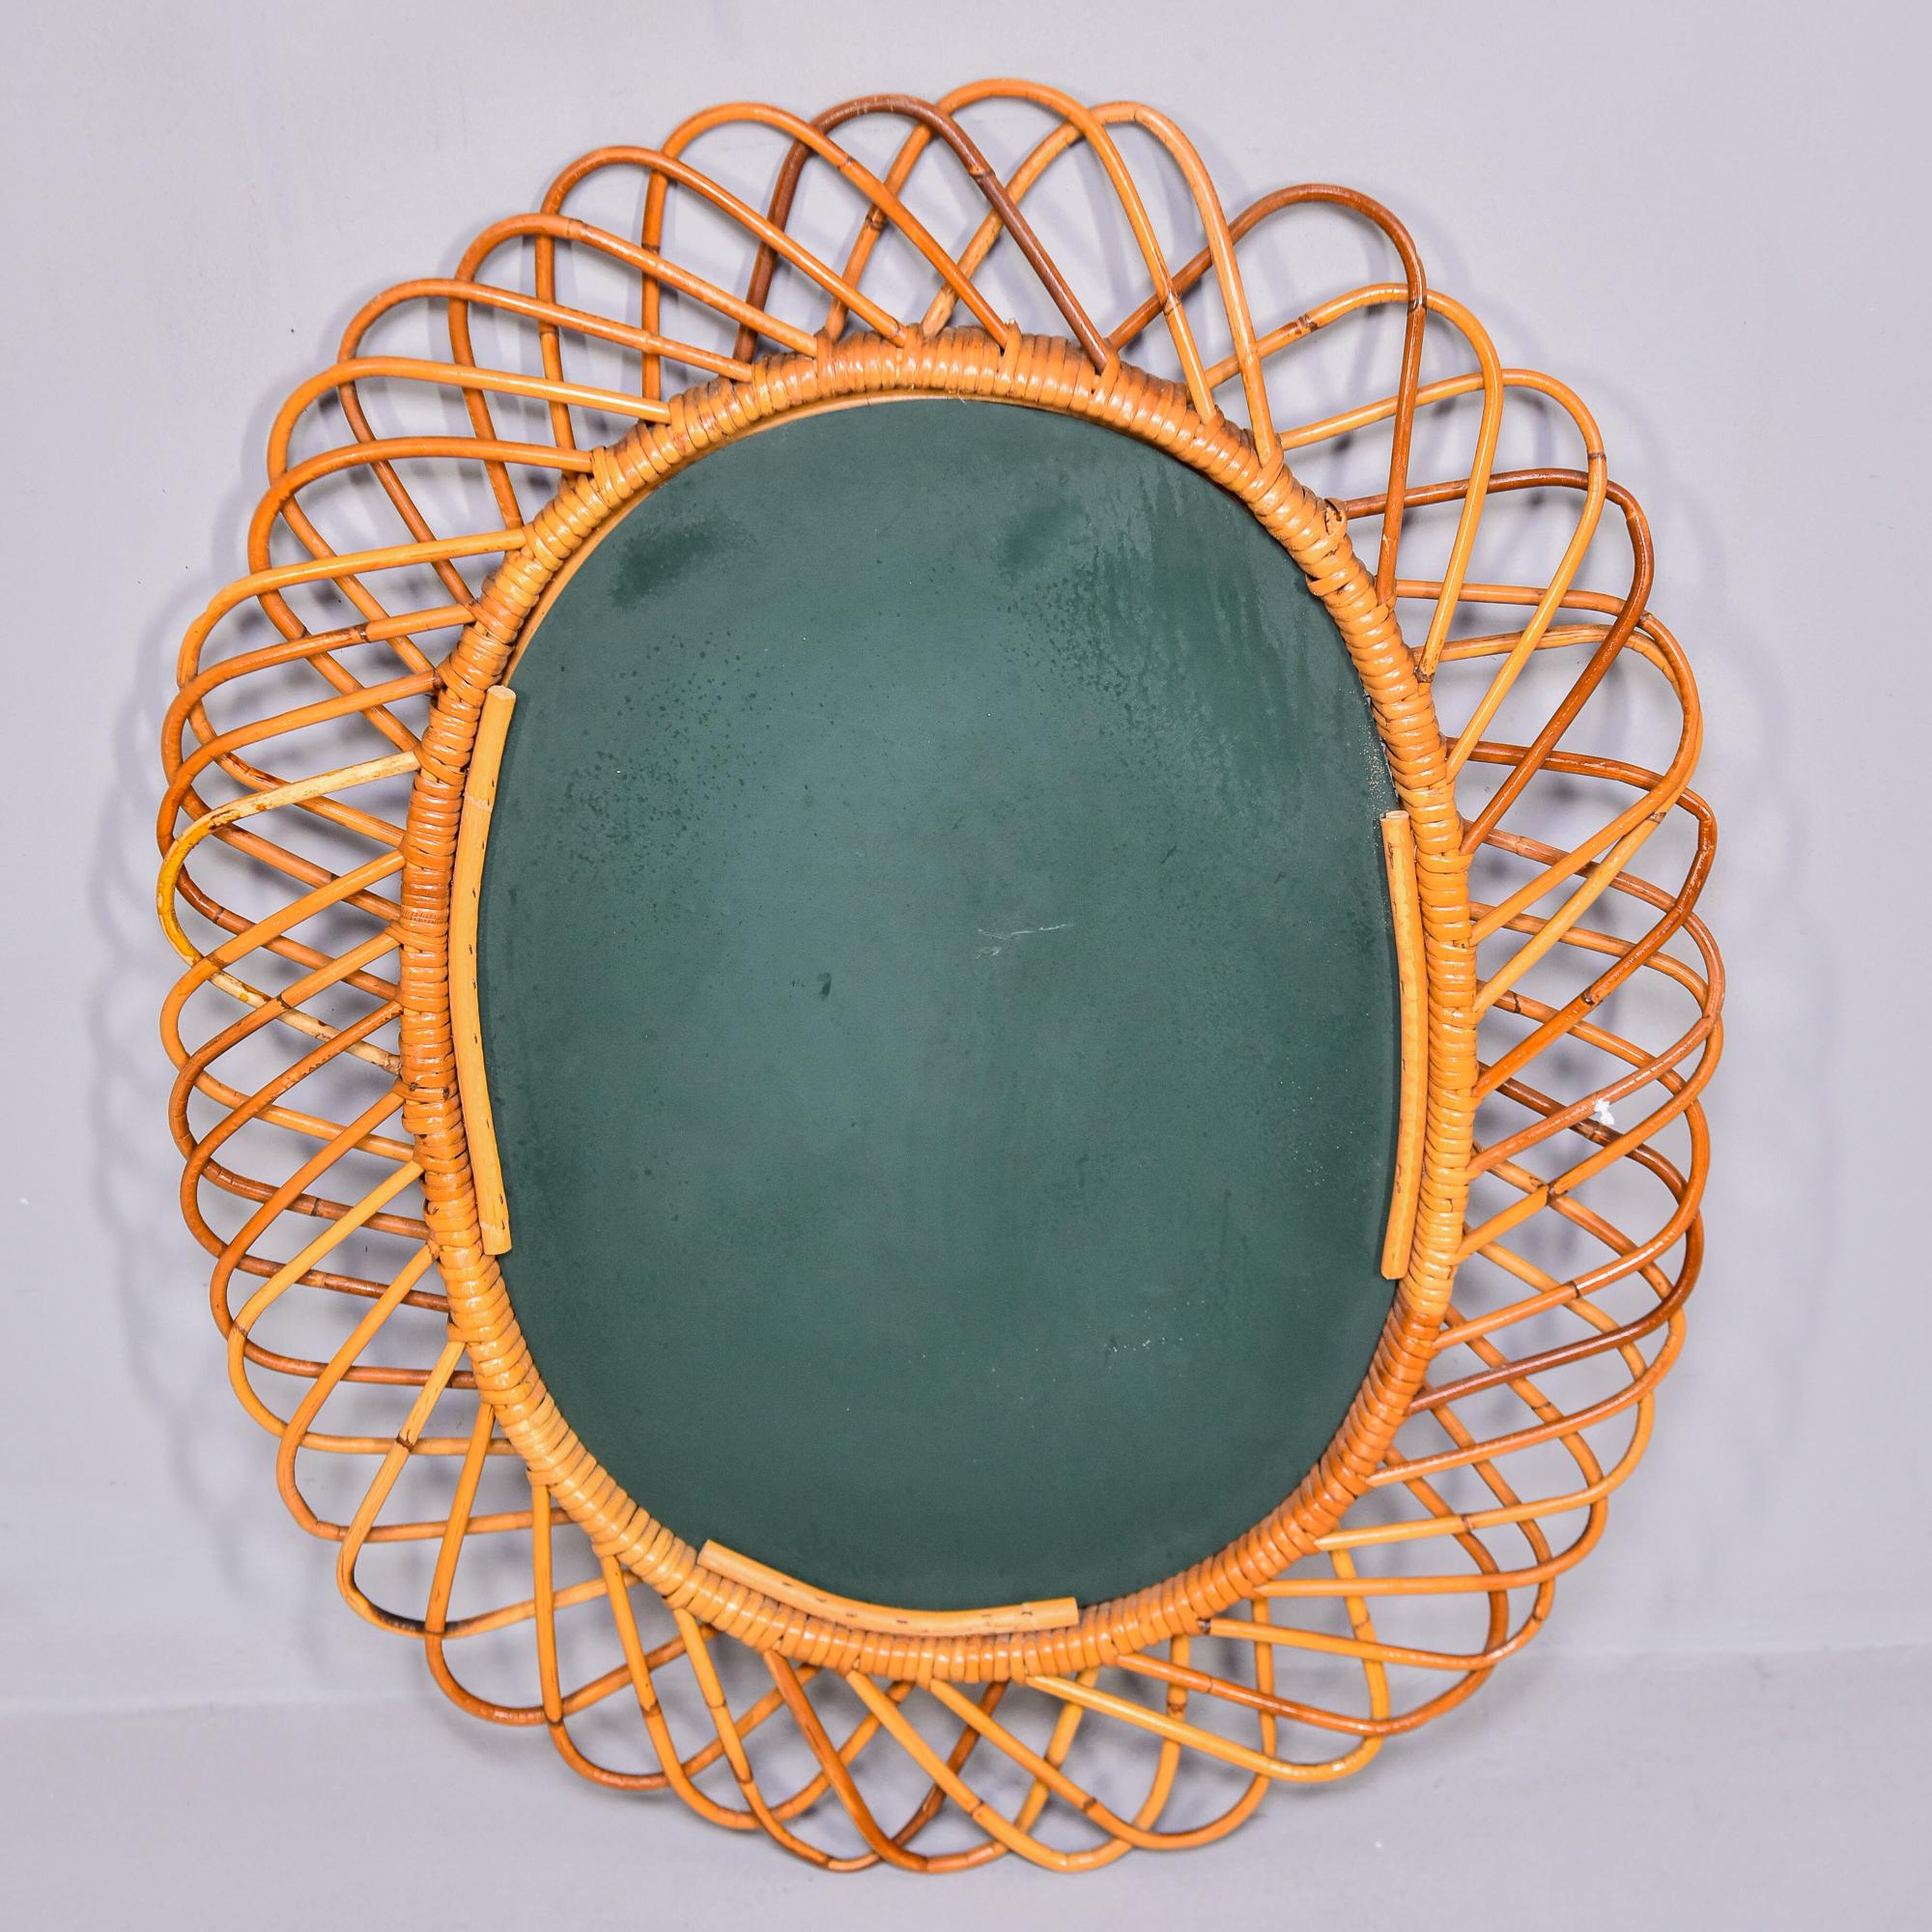 Midcentury Oval Mirror with Woven Rattan or Wicker Frame 3